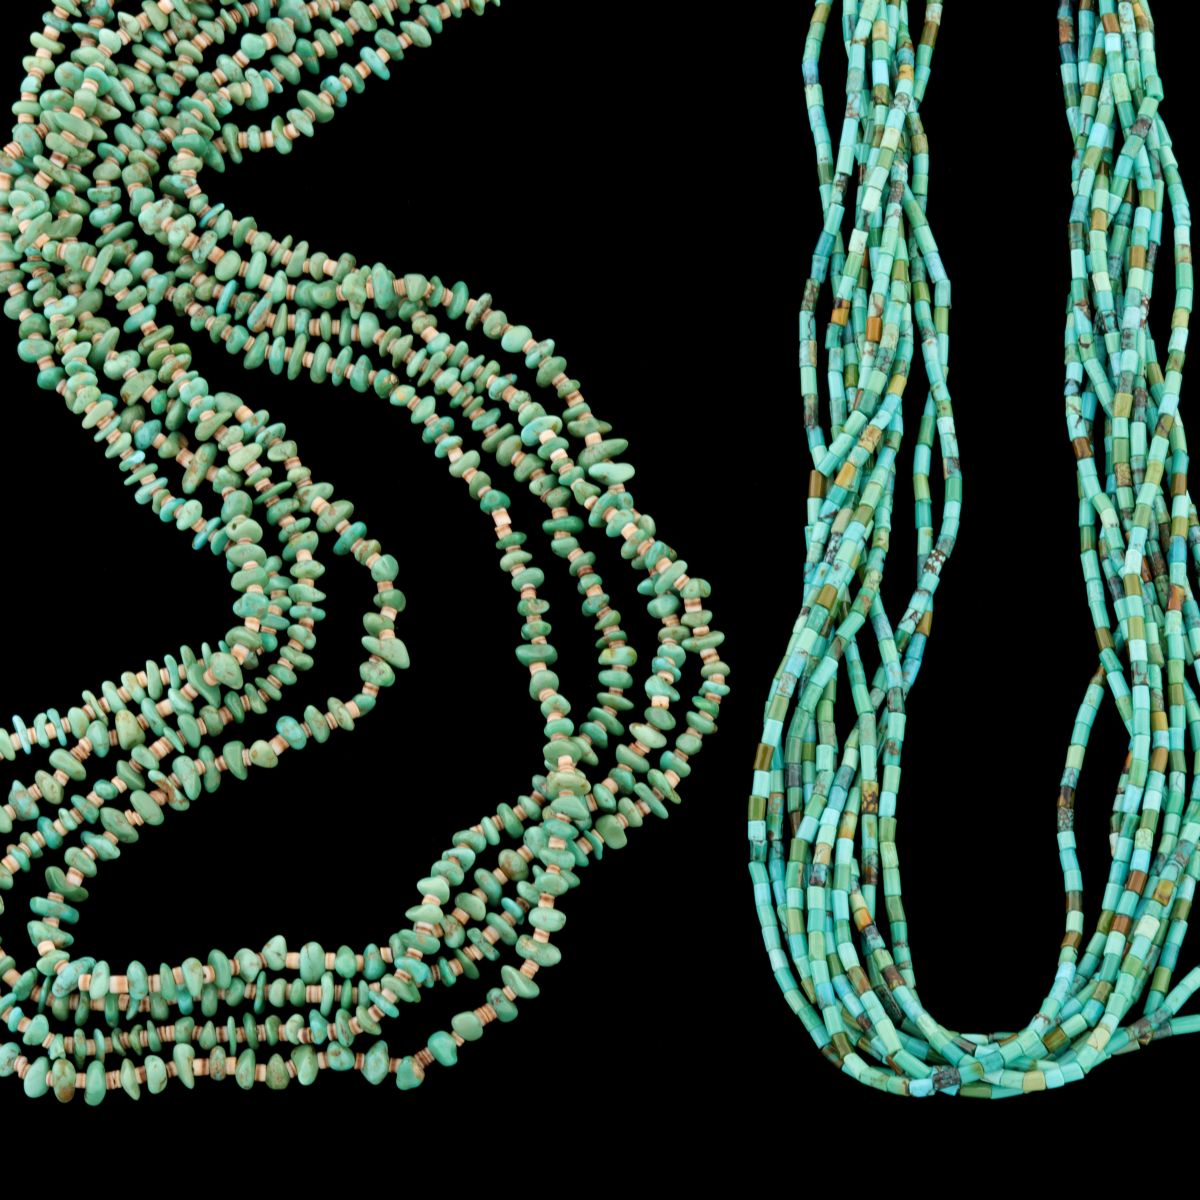 TWO NATIVE AMERICAN PUEBLO TURQUOISE NECKLACE STRANDS